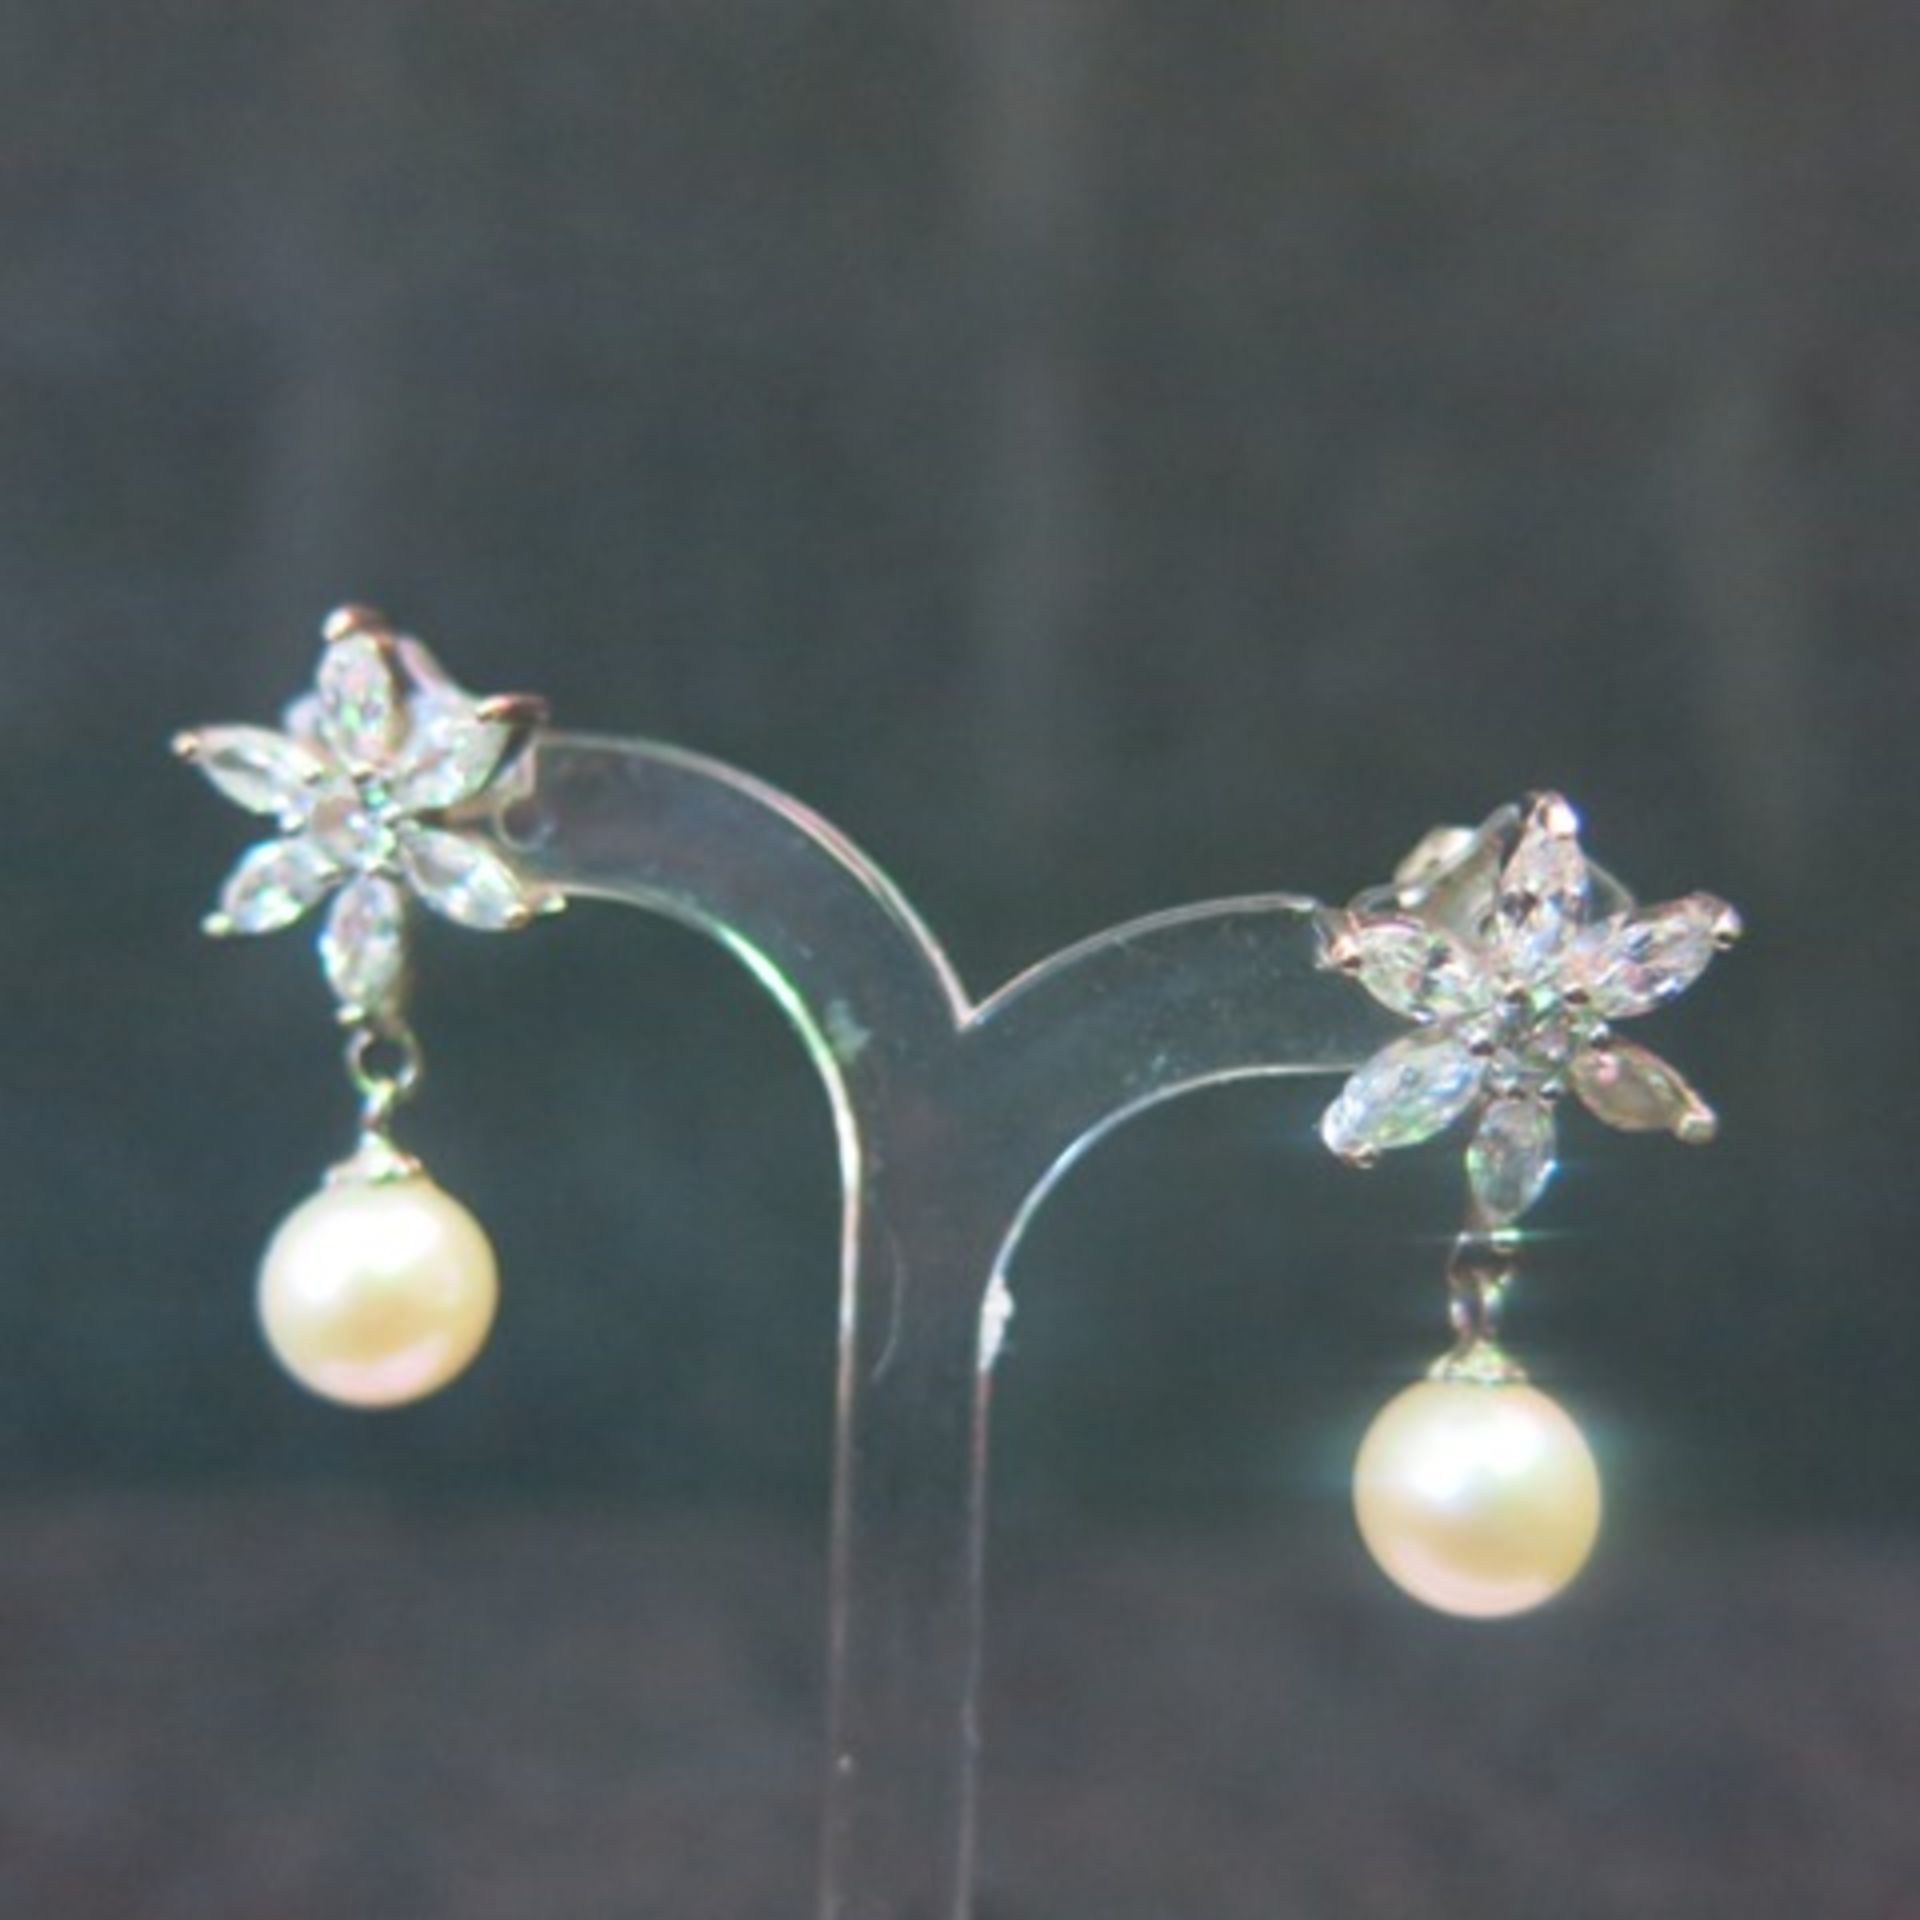 Pair of Pearl 7.5mm Drop Earrings with White Metal & Clear Stone Flower Petal Motif Over the - Image 2 of 2